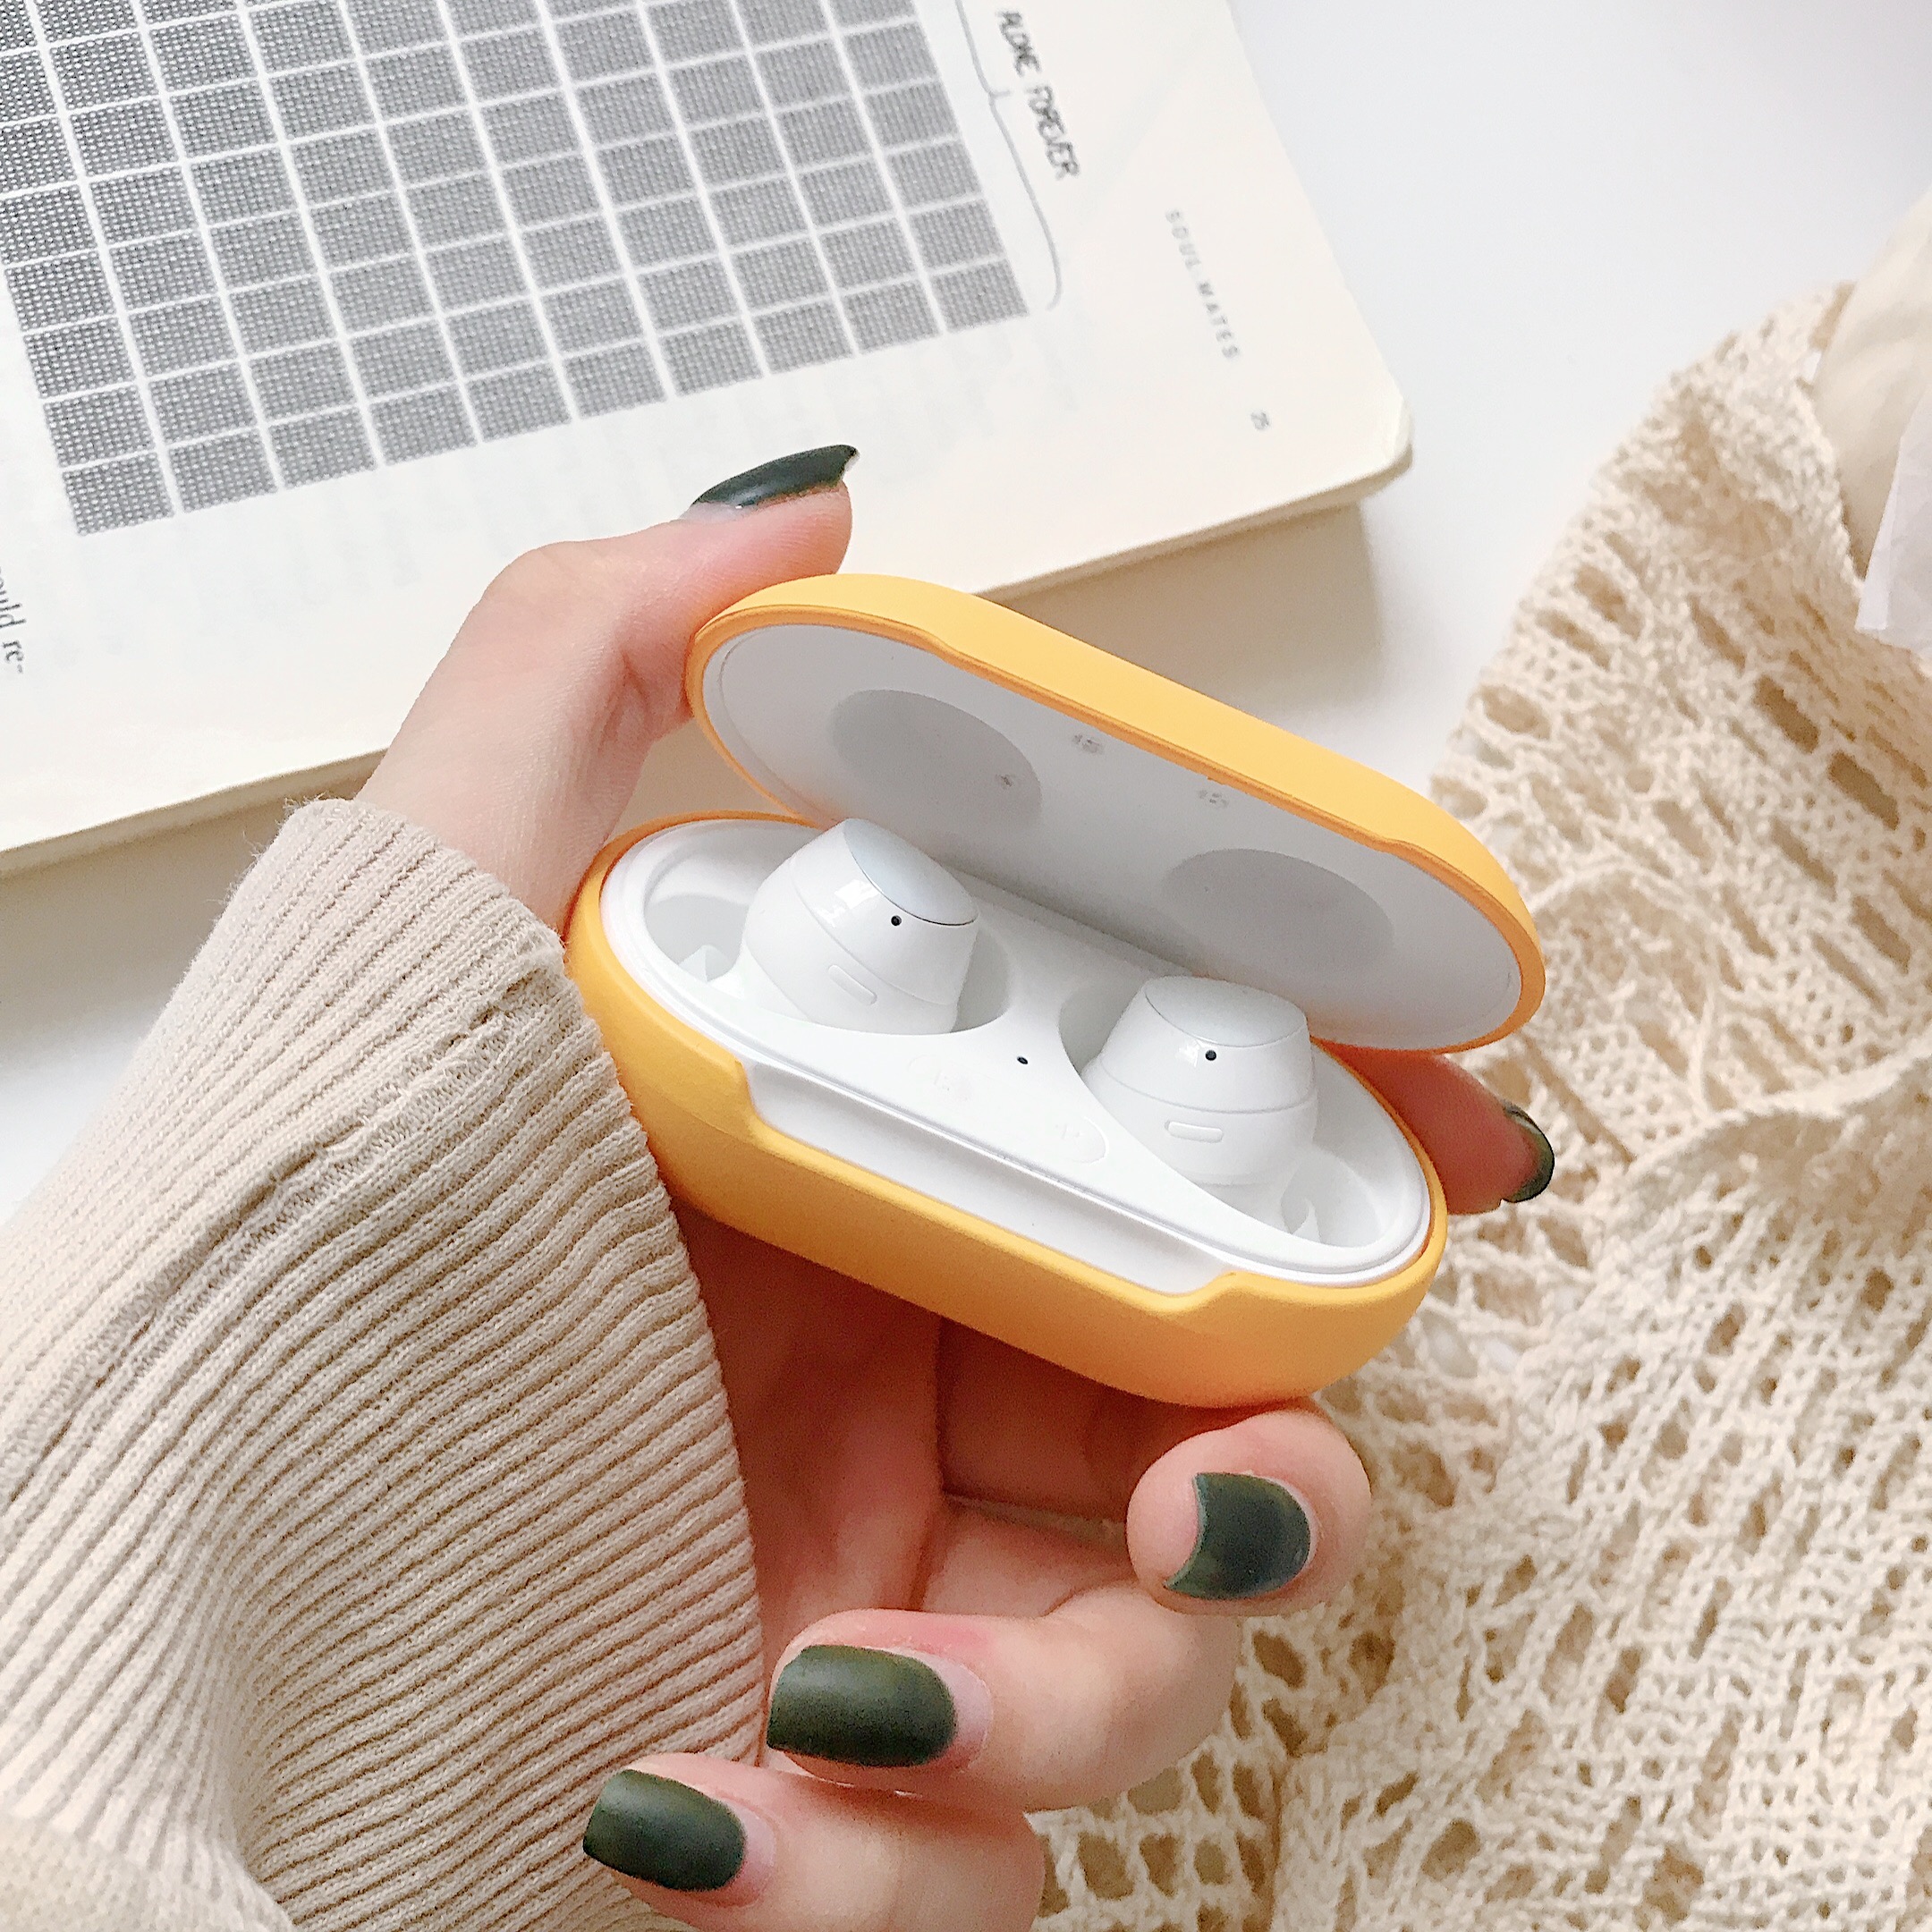 Samsung Galaxy Buds / Buds + Case Candy Color Samsung Buds + Cover Chống bụi Tai nghe Bảo vệ PC Vỏ cứng